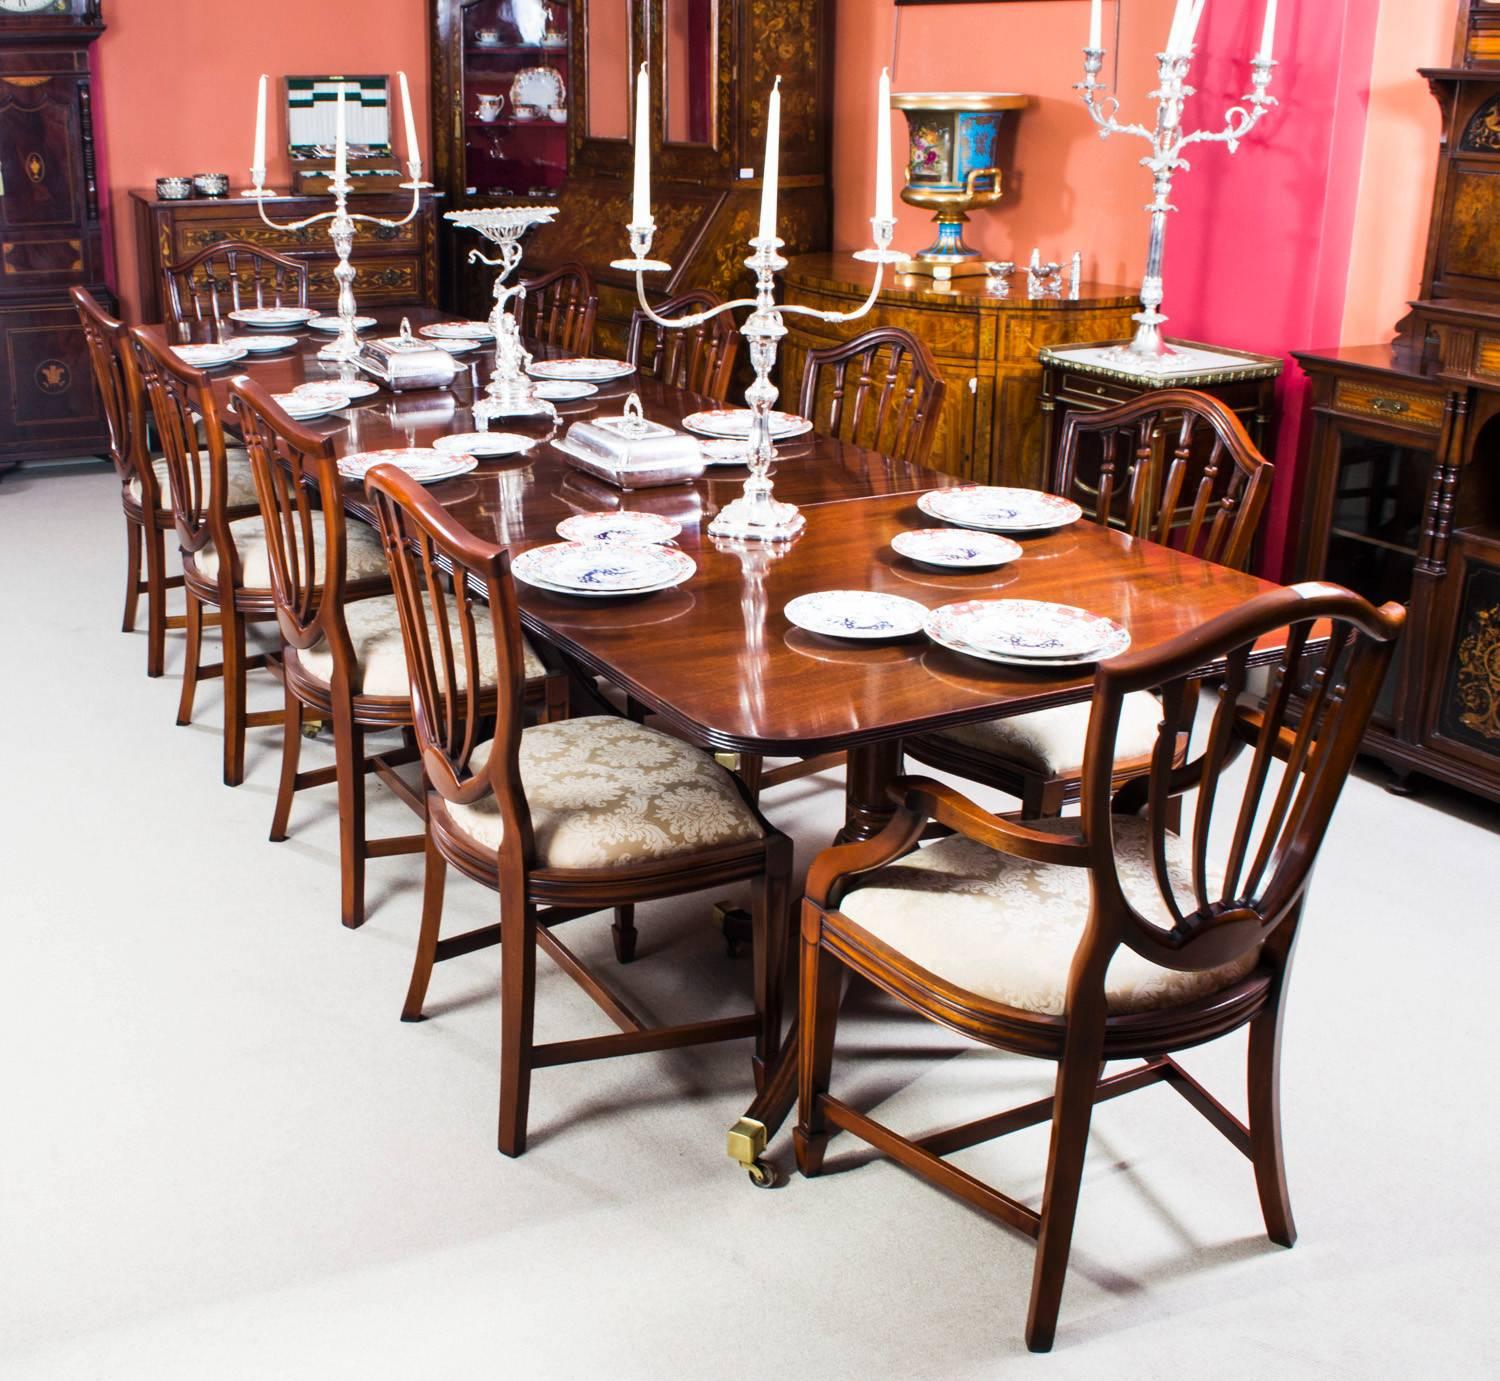 This is an elegant antique Regency style dining set that comprises an antique Regency style dining table, circa 1900 in date and the set of ten Hepplewhite style dining chairs. 

The table has two leaves which can be added or removed as required